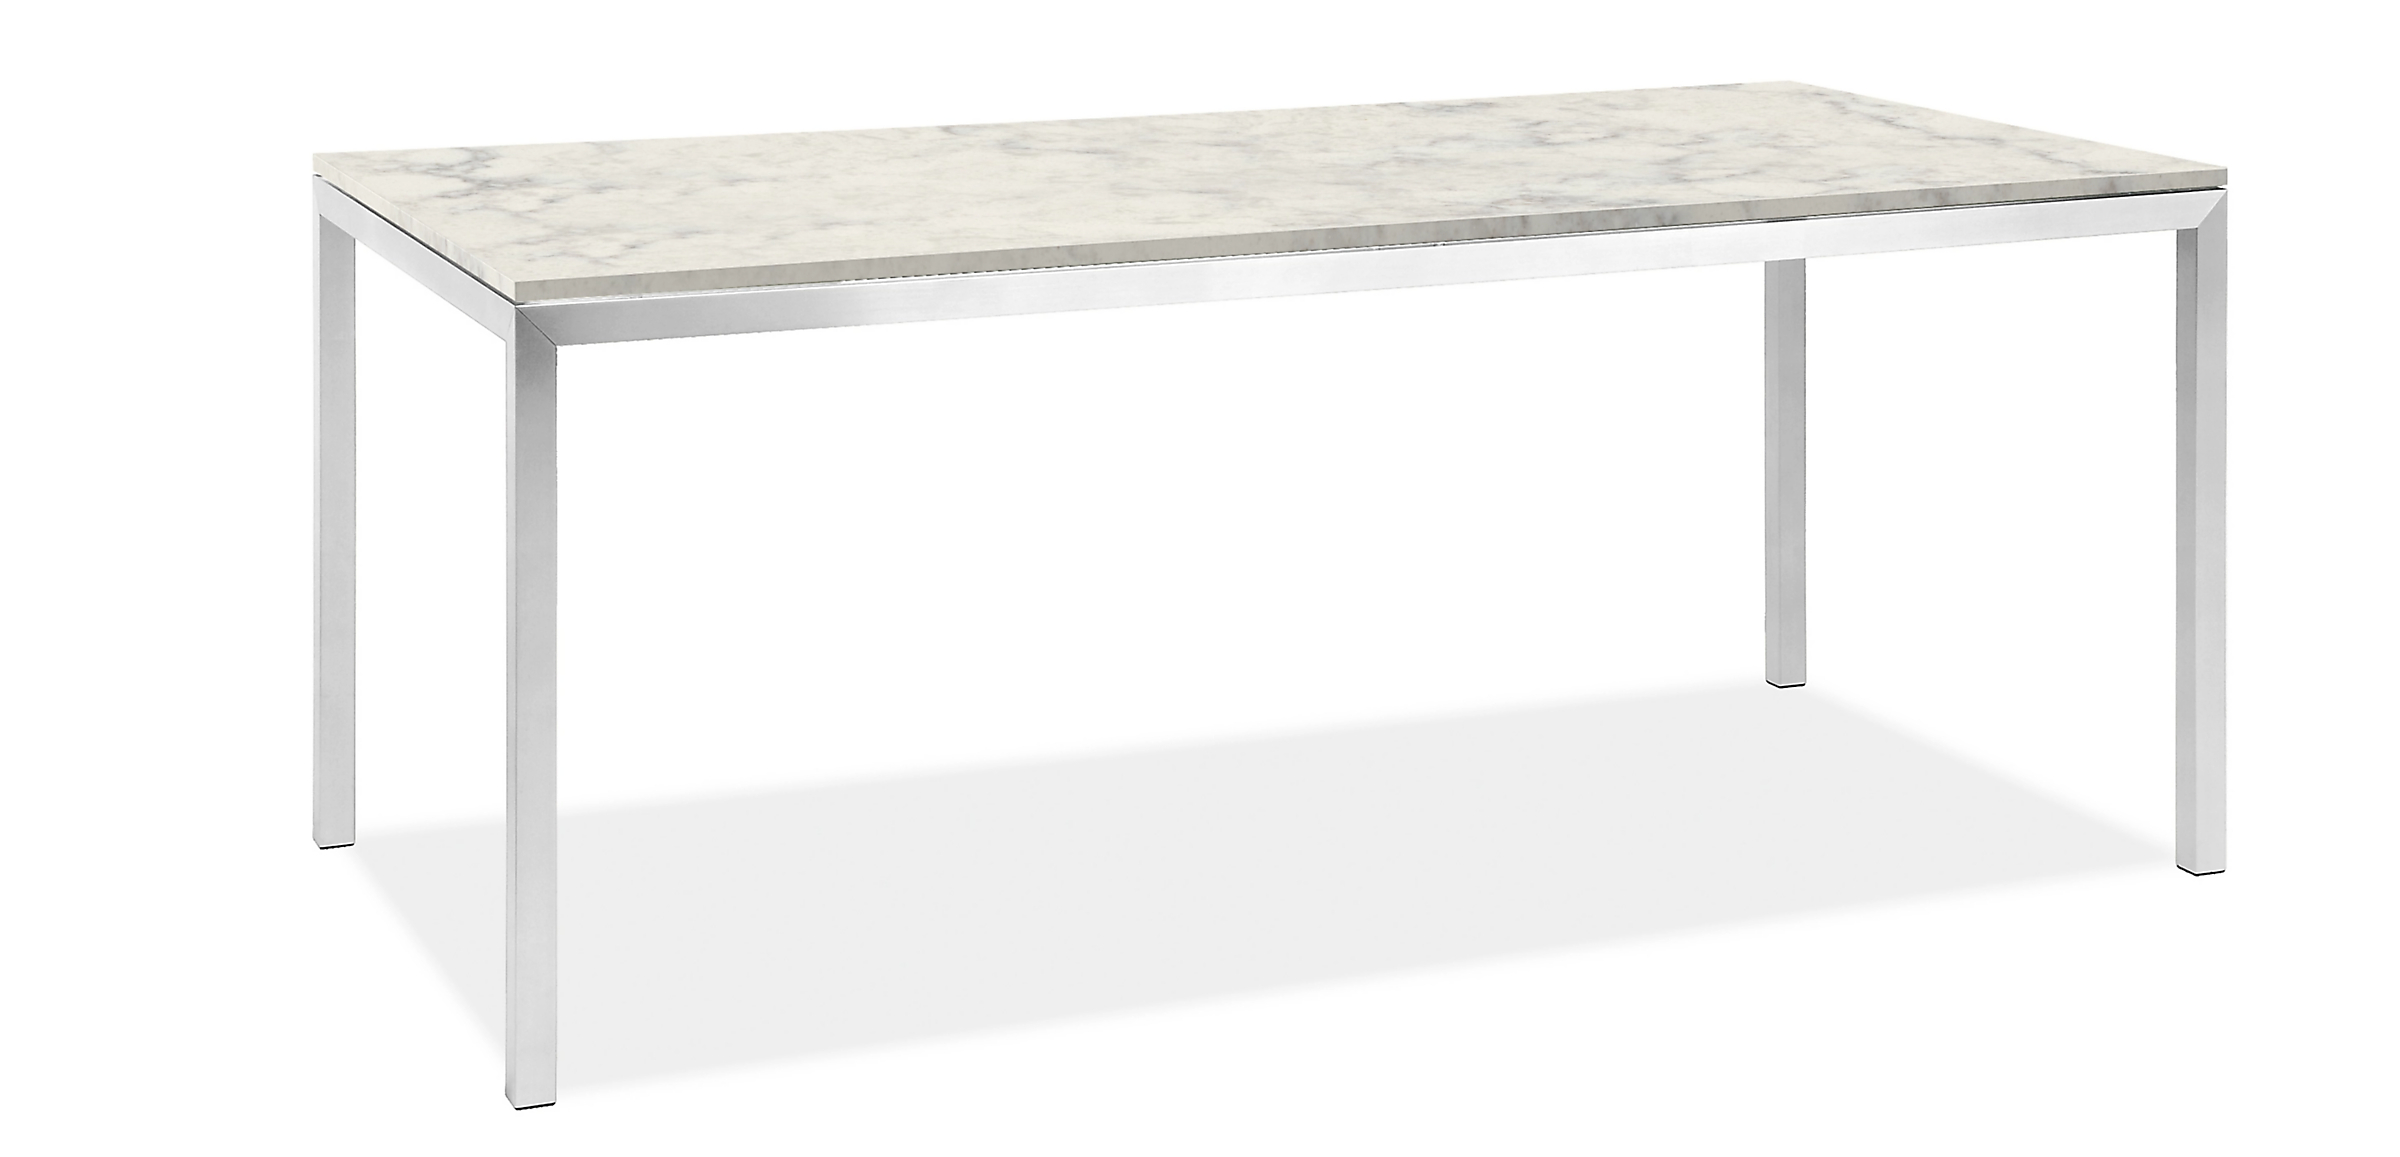 Parsons 66w 24d 29h Dining Table in 1.5" Stainless Steel w/Marbled White Quartz